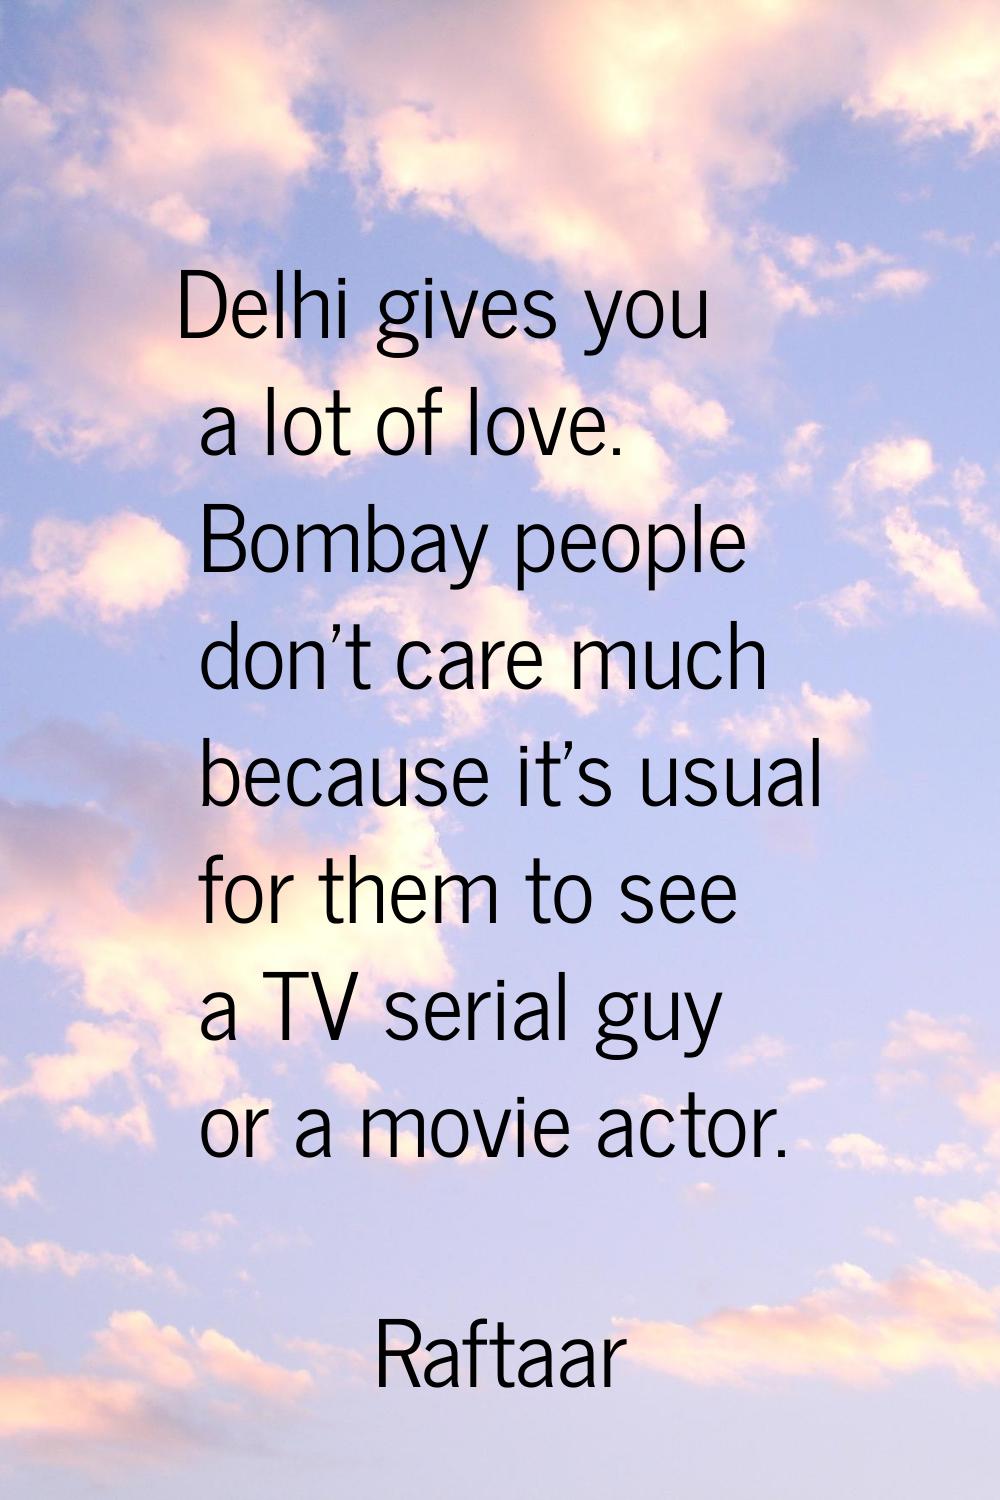 Delhi gives you a lot of love. Bombay people don't care much because it's usual for them to see a T